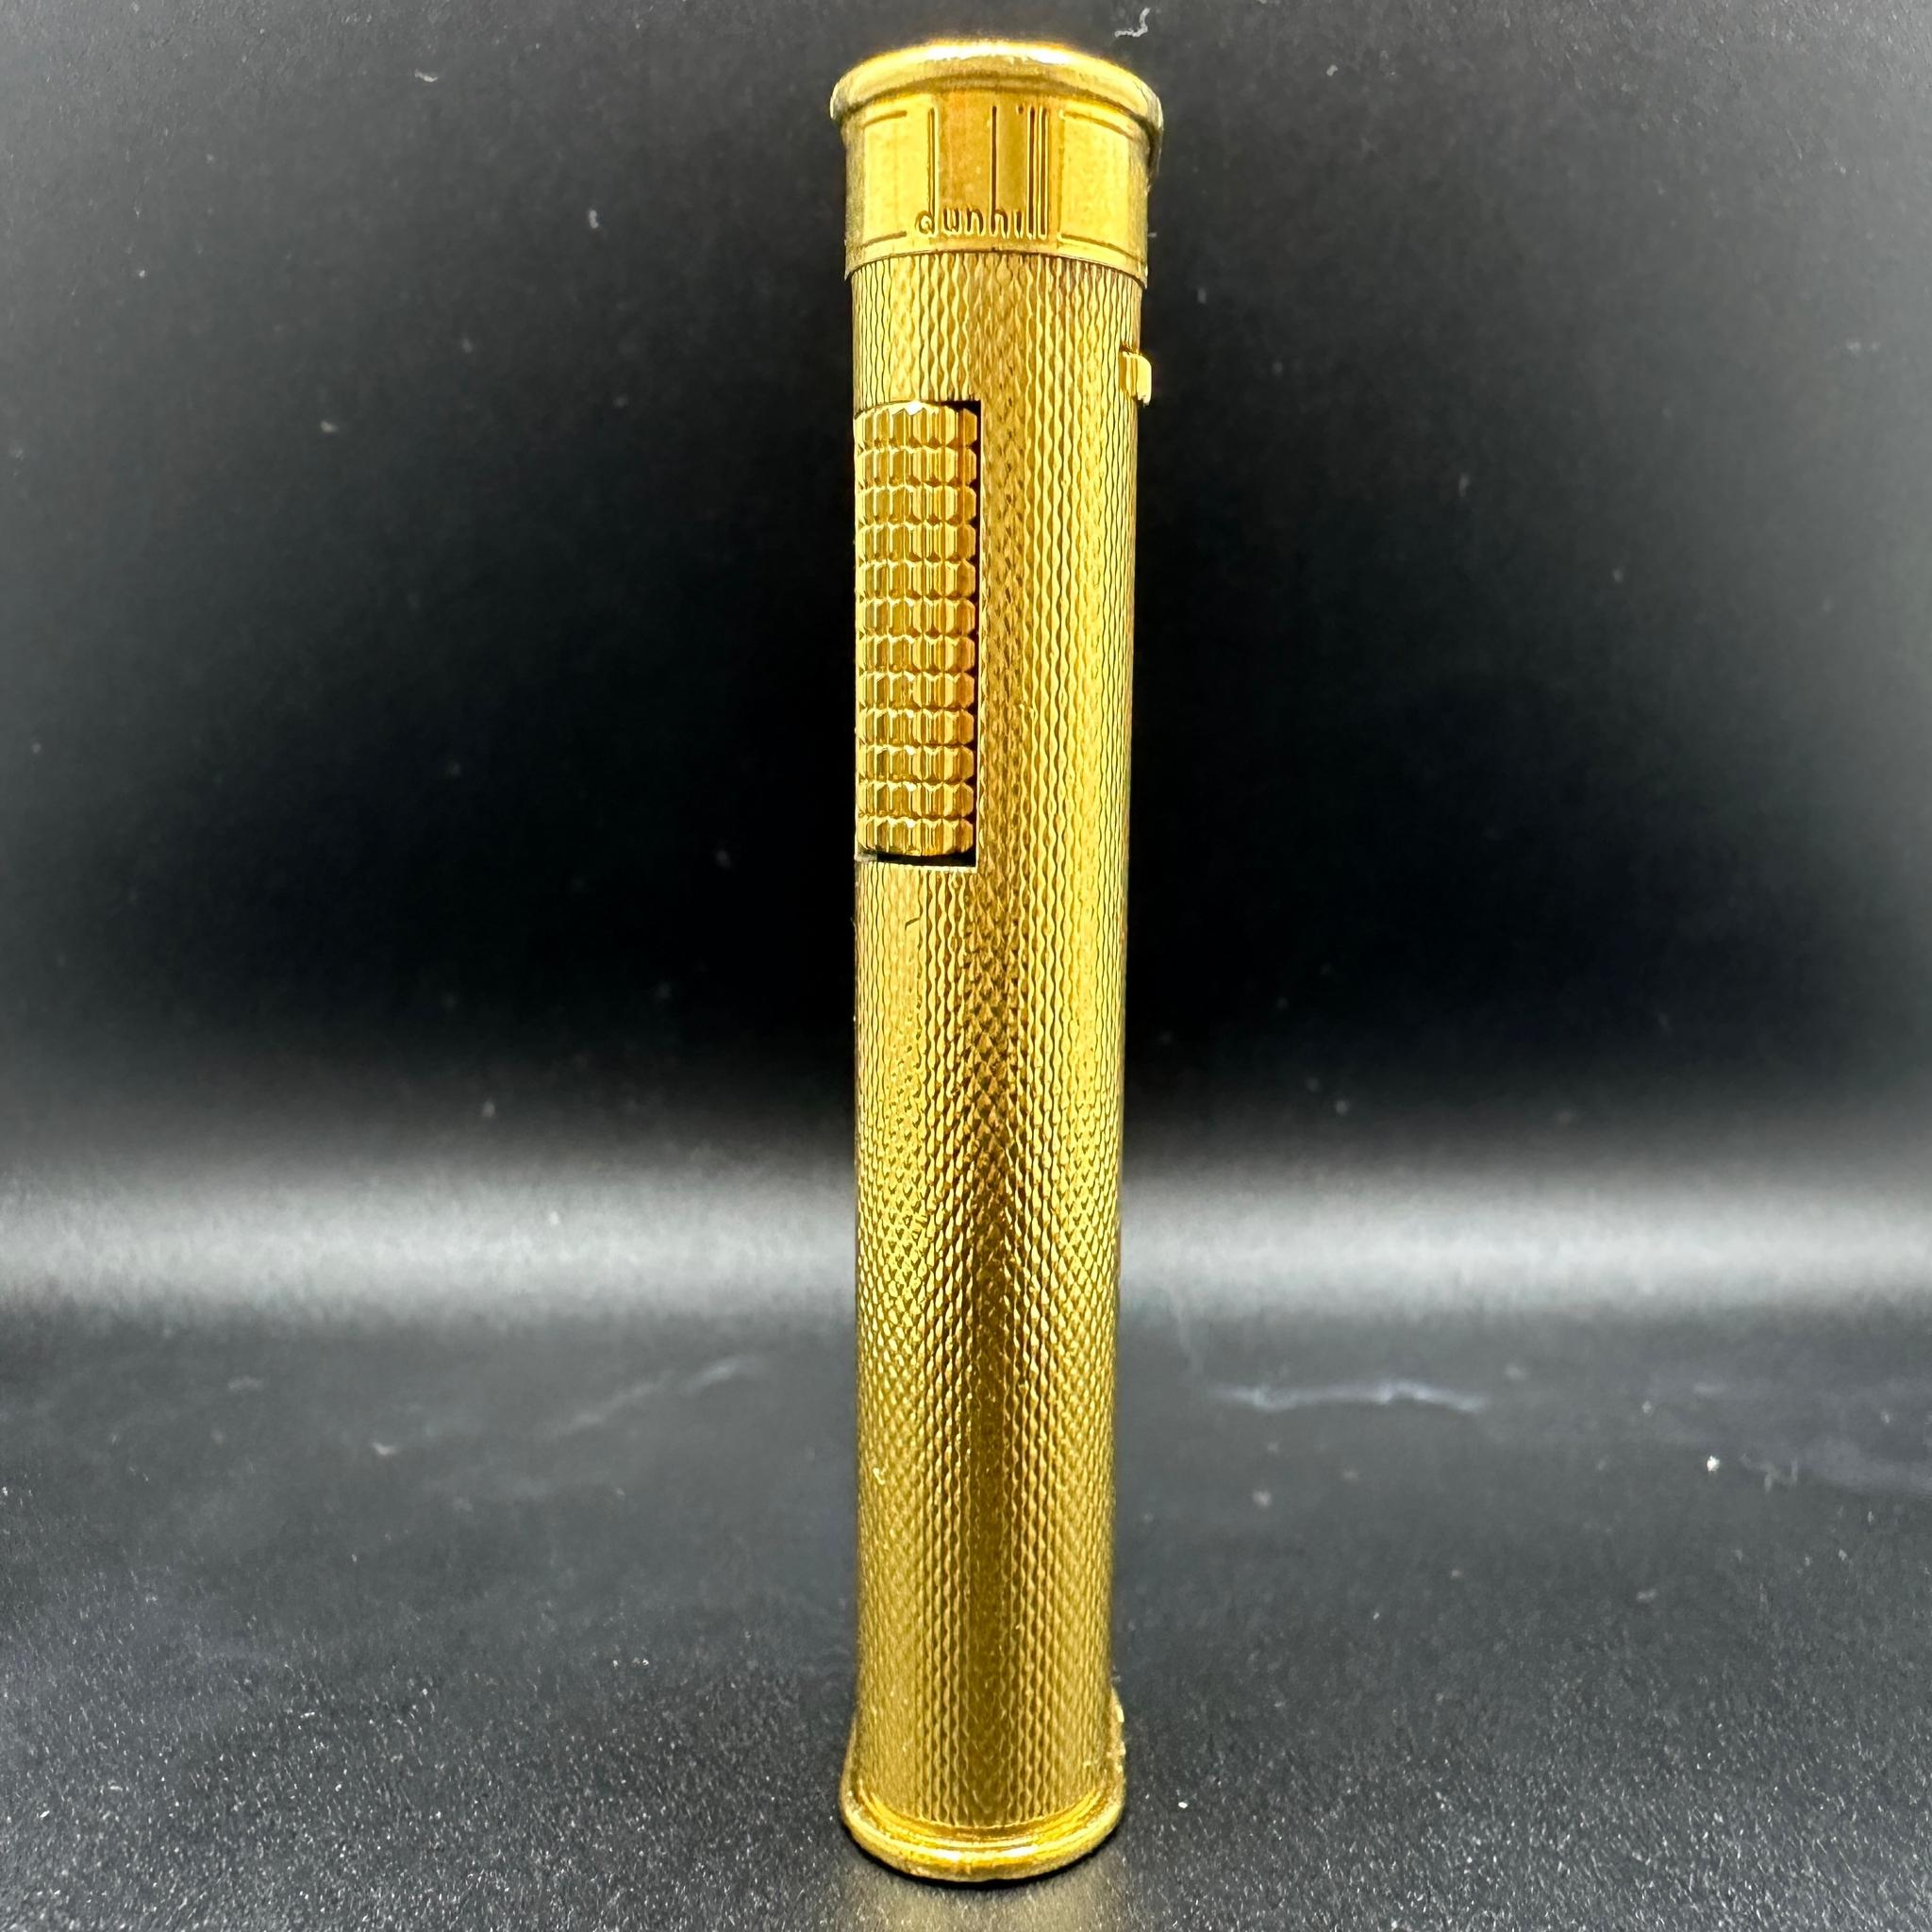 Vintage Dunhill Gold Plated Evening Slim Lighter In Excellent Condition For Sale In New York, NY